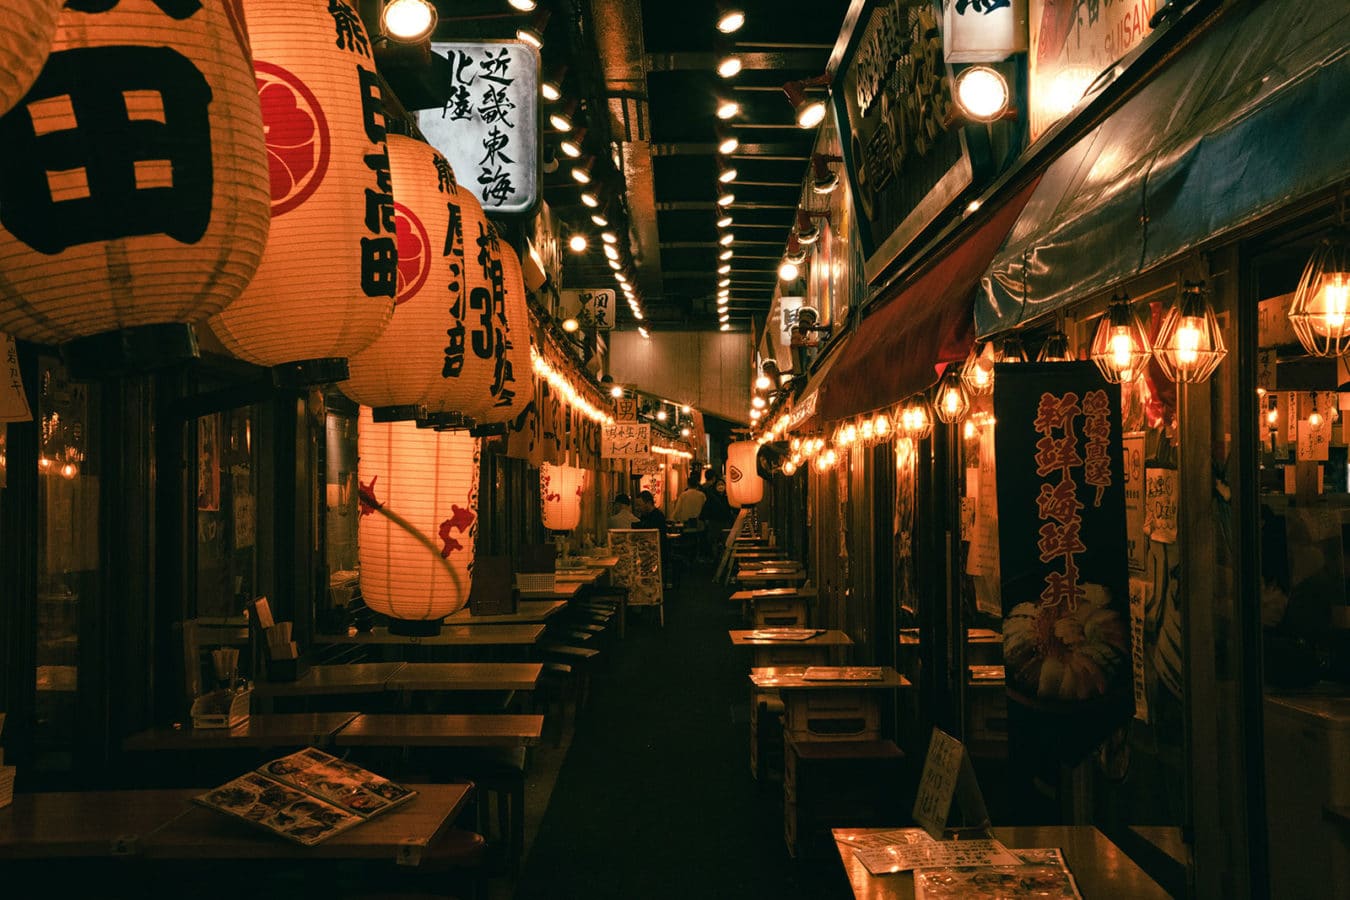 Tokyo street at night with lanterns and restaurant tables set with menus